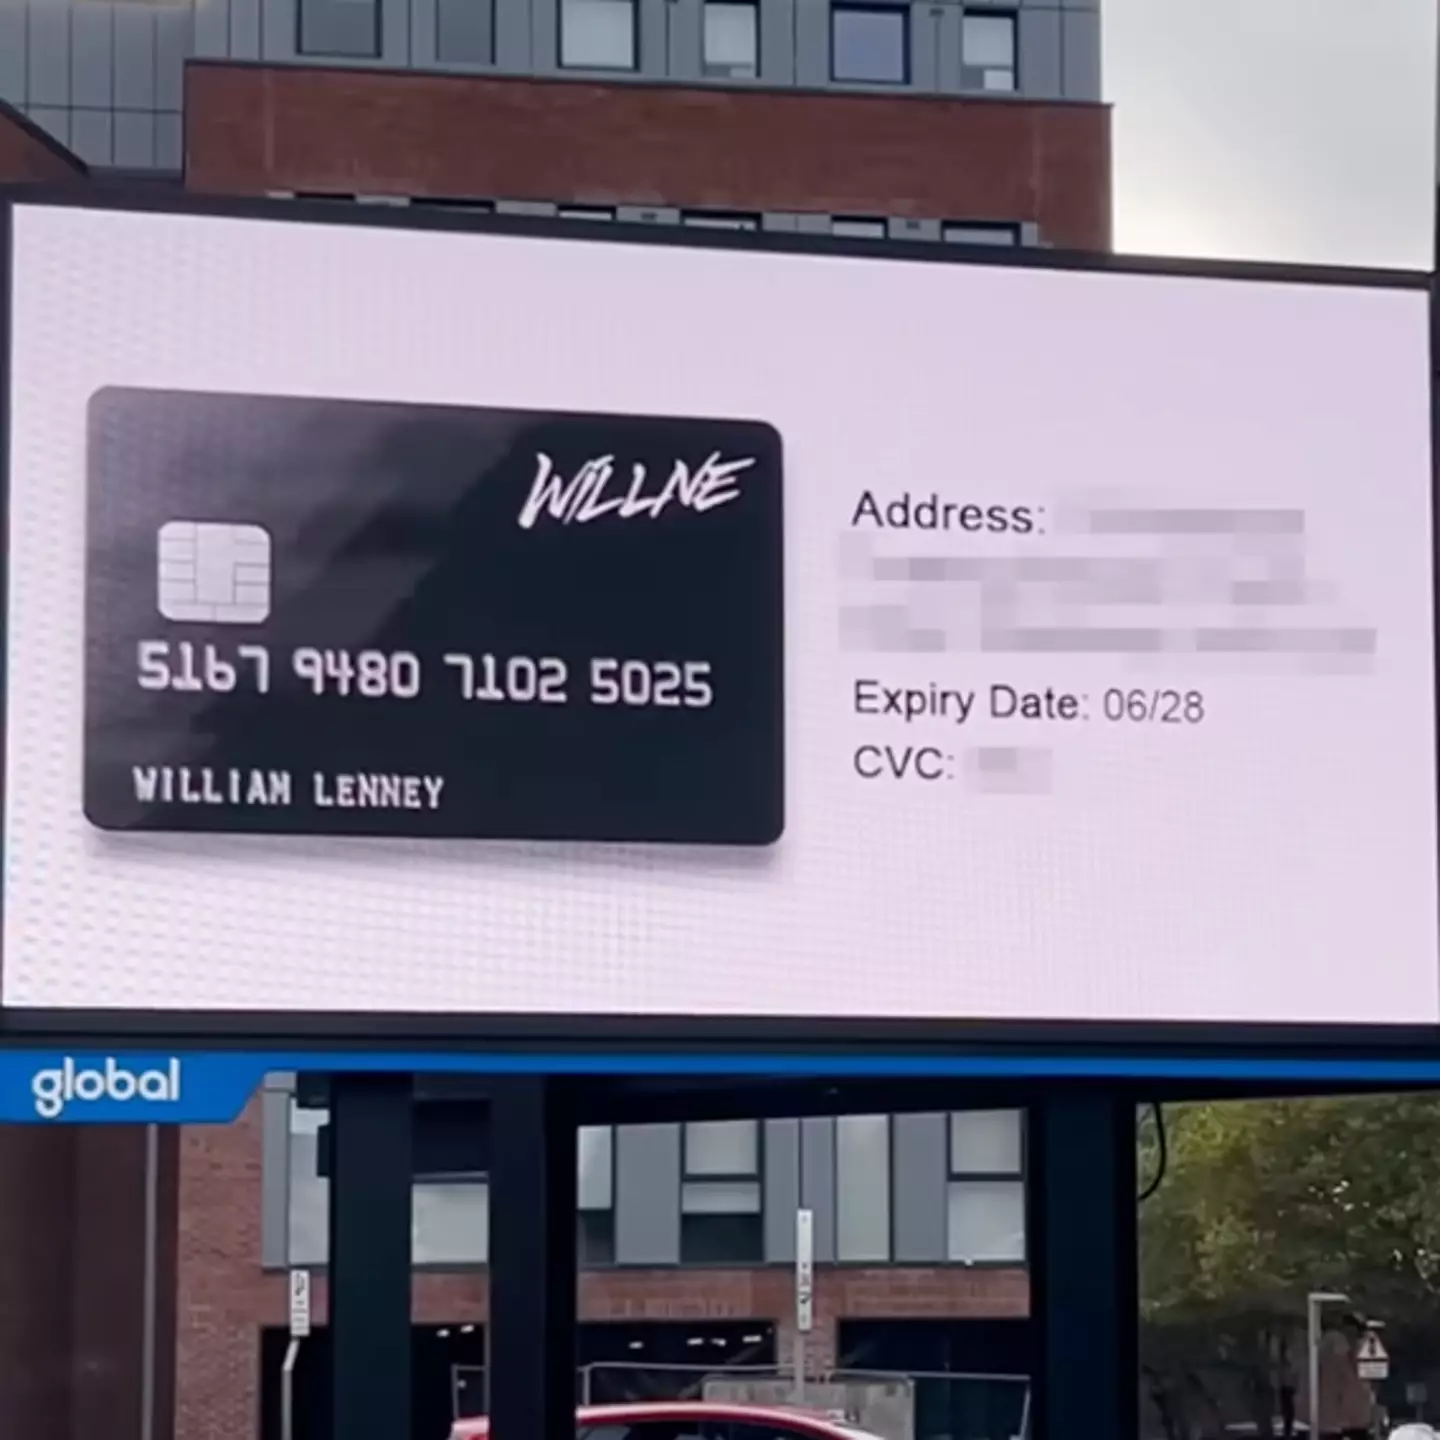 YouTuber put his bank details on billboards across the UK to see which city would spend the money first